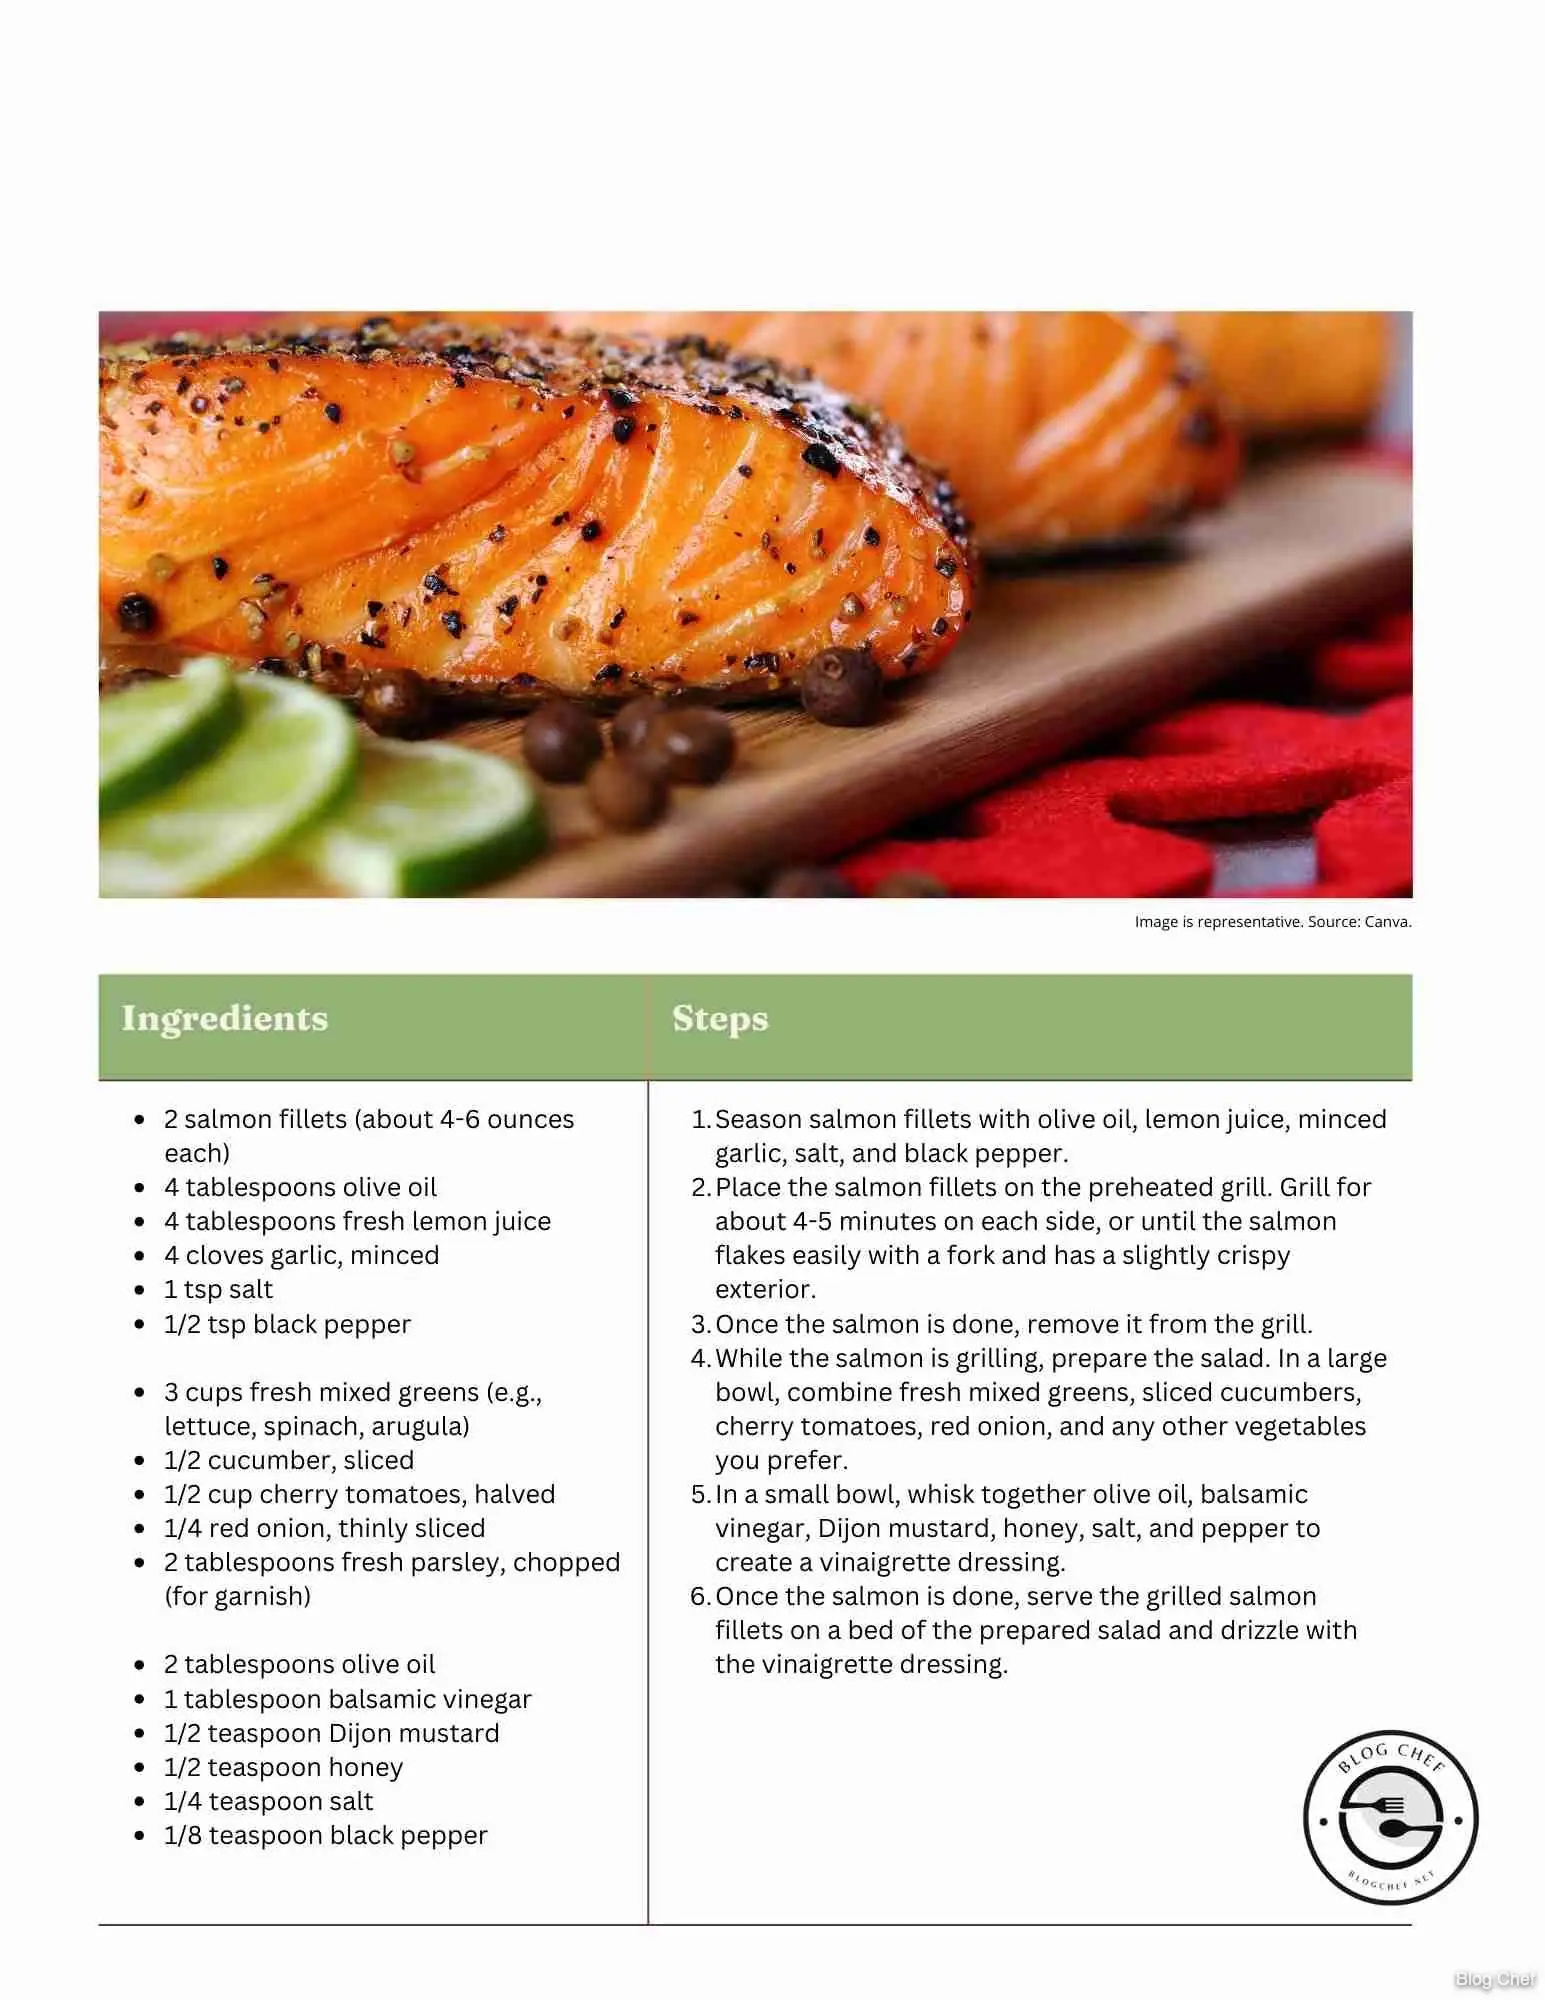 Recipe card for grilled salmon with salad.